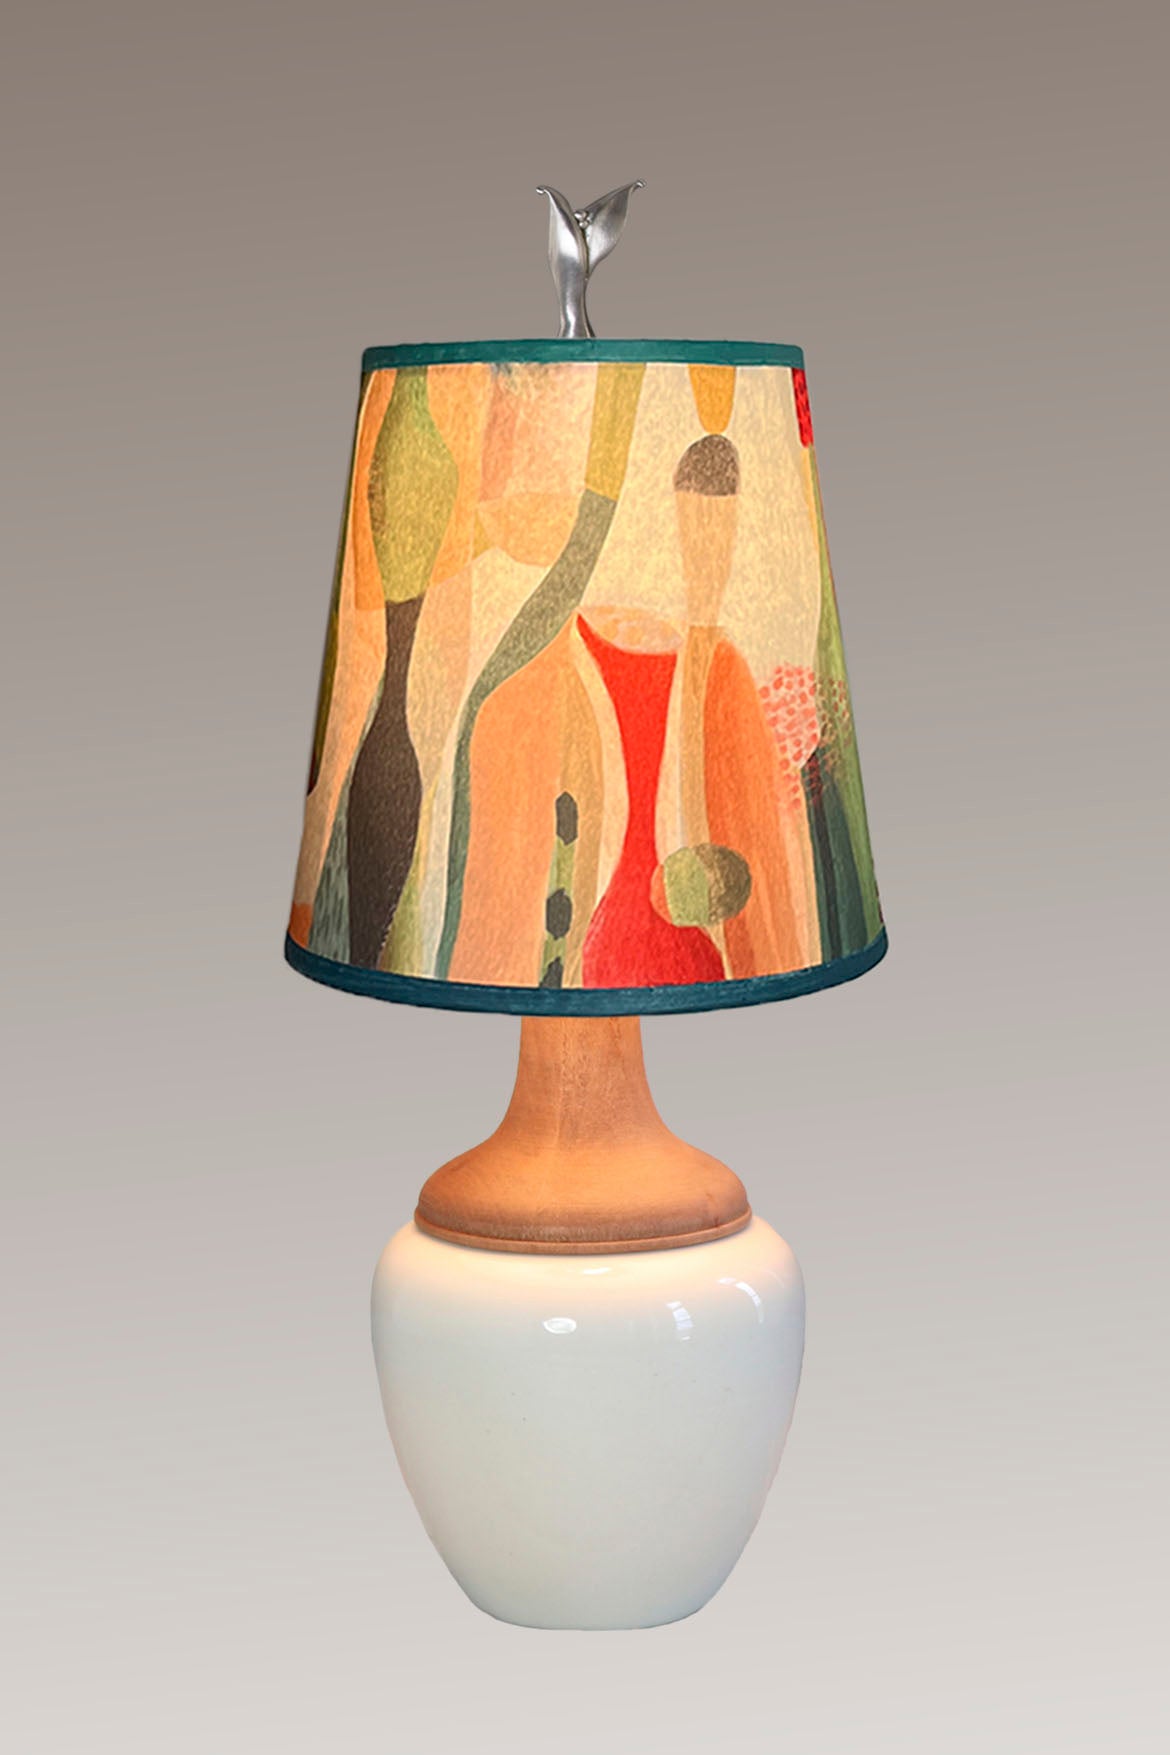 Ceramic and Maple Table Lamp in Ivory Gloss with Small Drum Shade in Riviera in Poppy